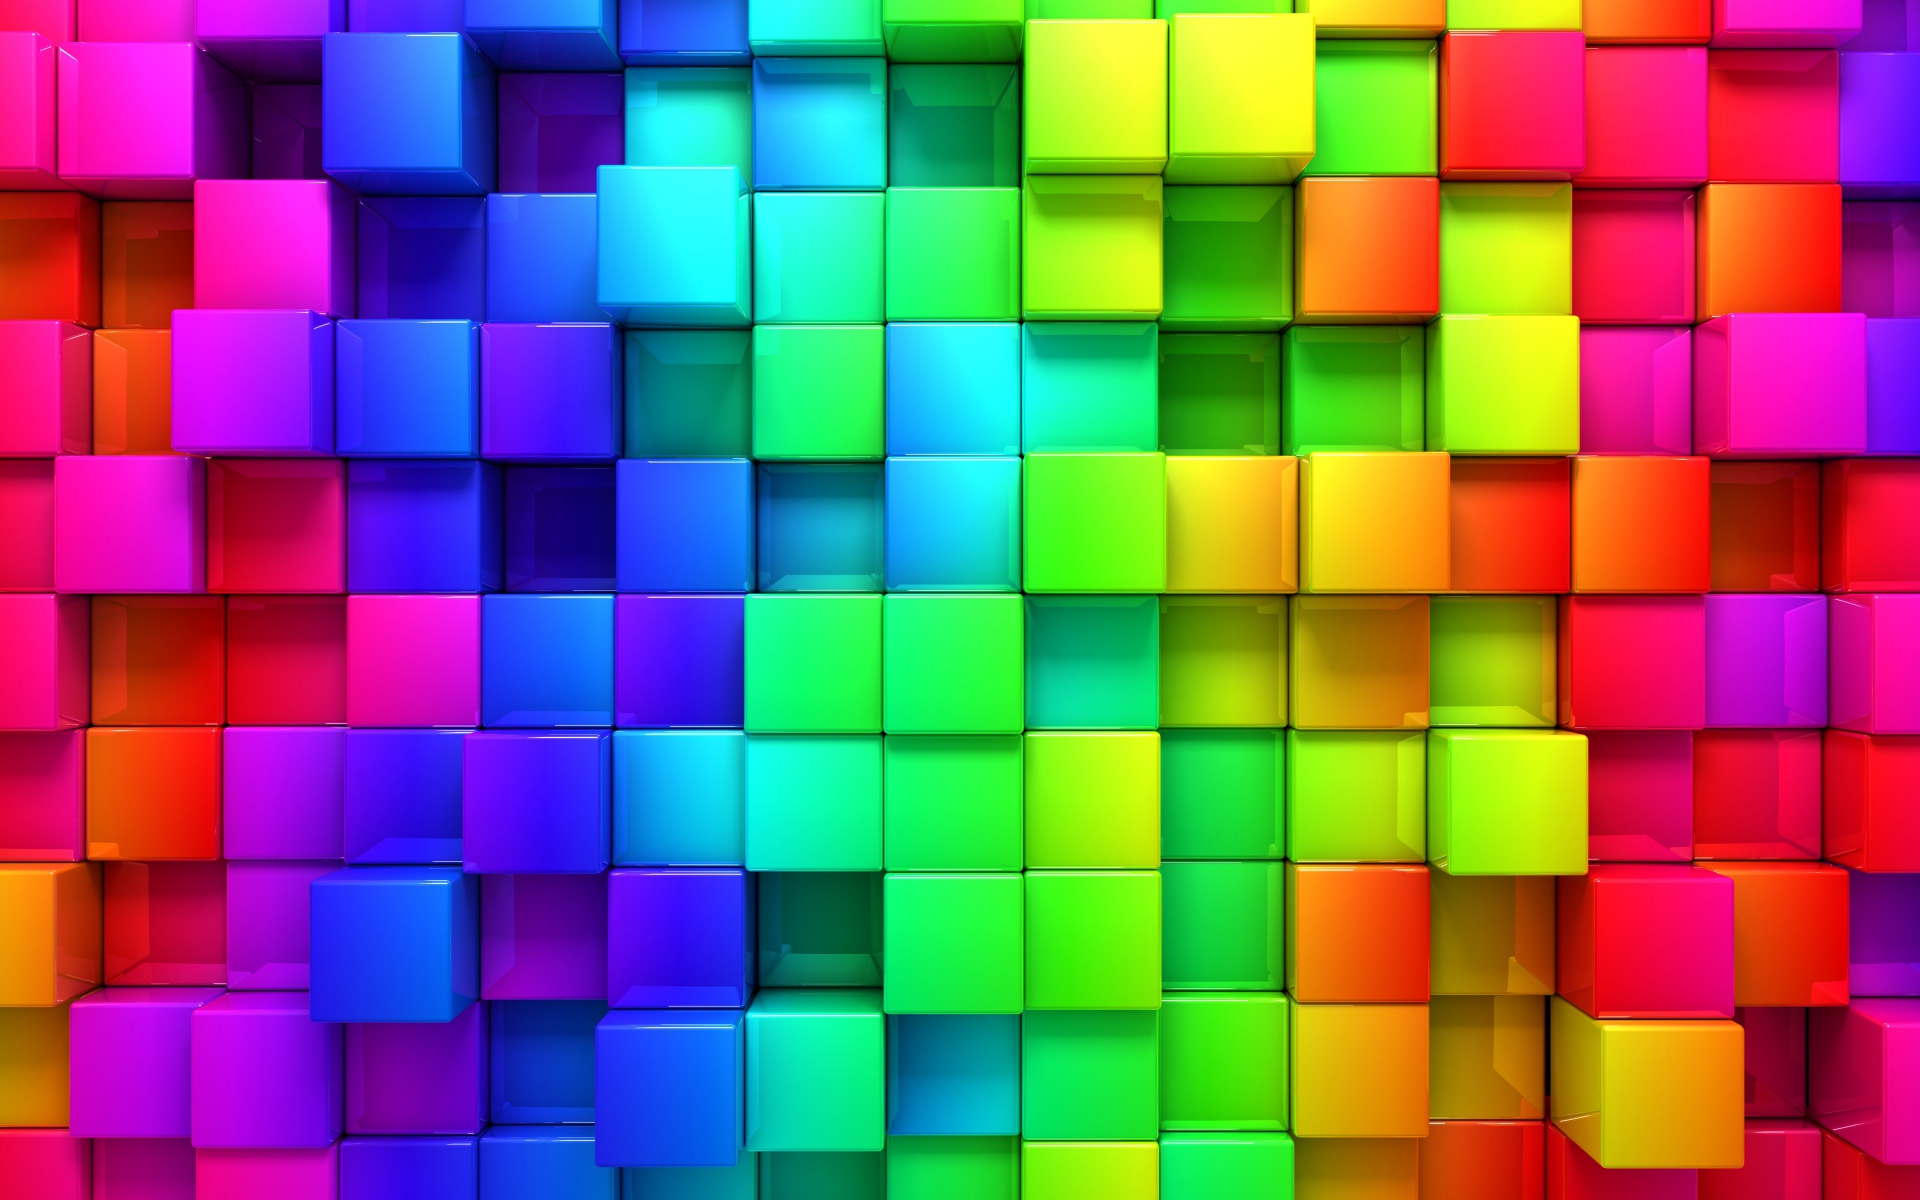  Free Colorful Backgrounds